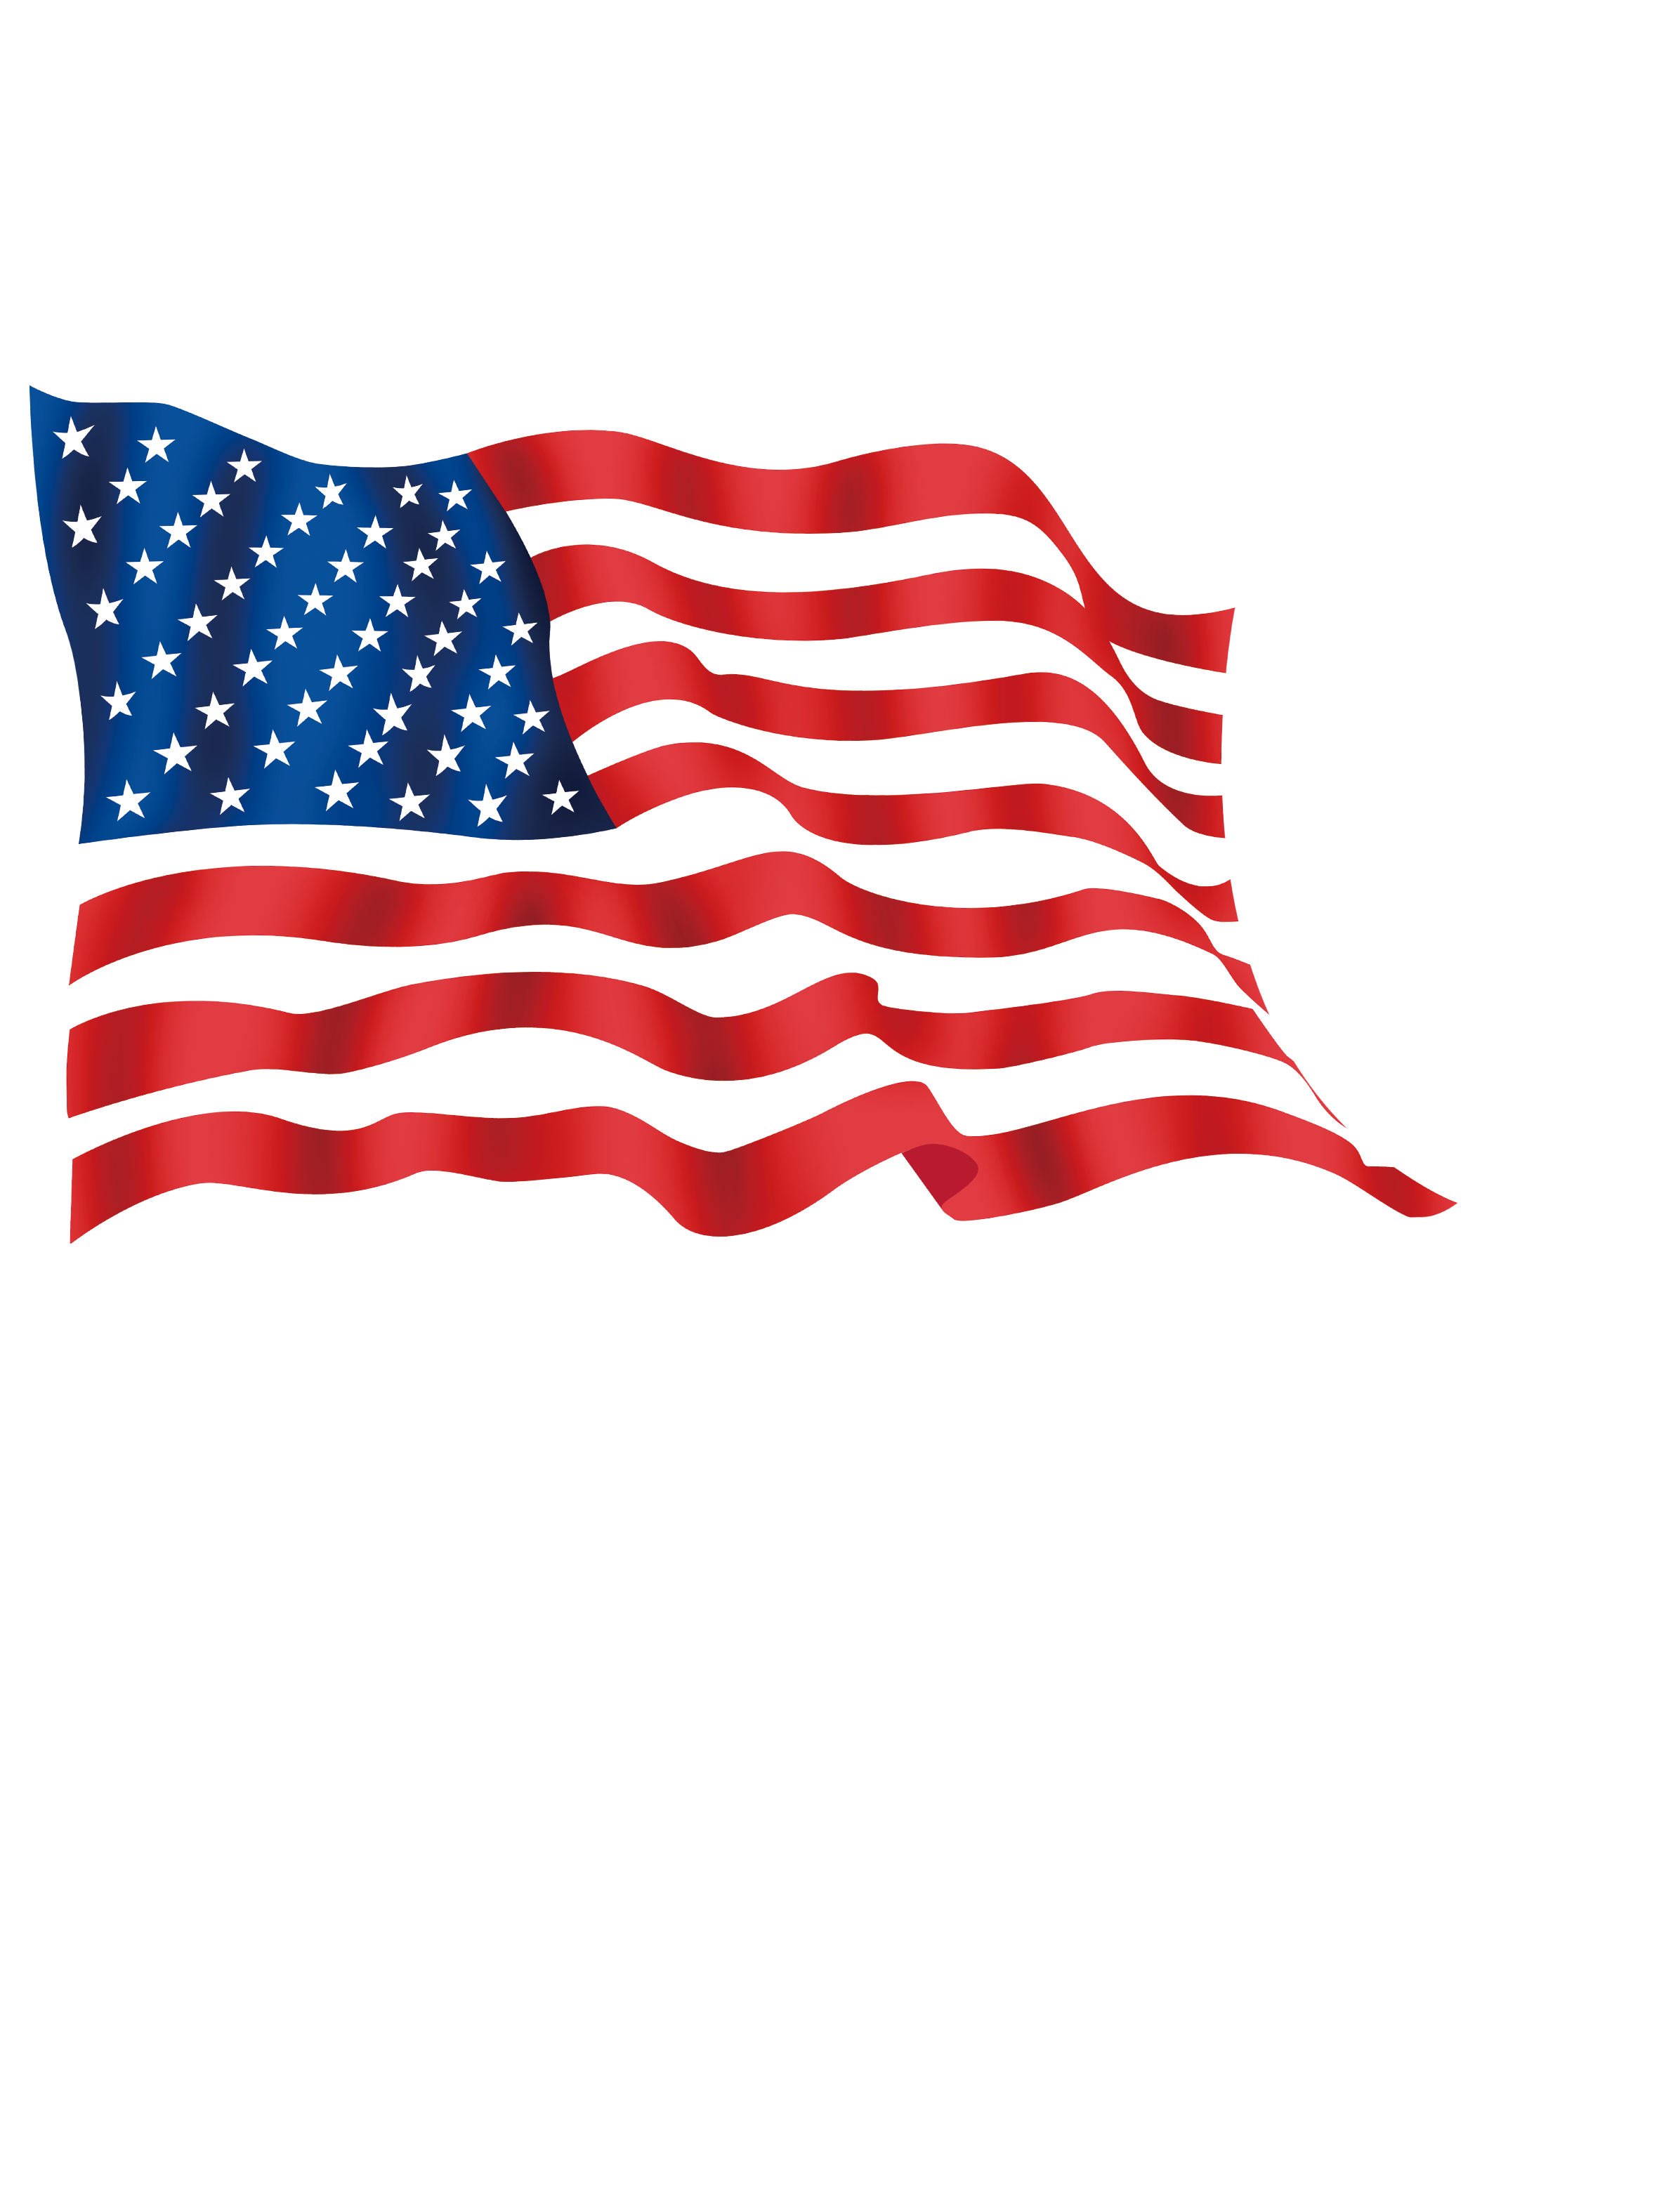 Flag of the United States Clip art - American flag png download - 2362*